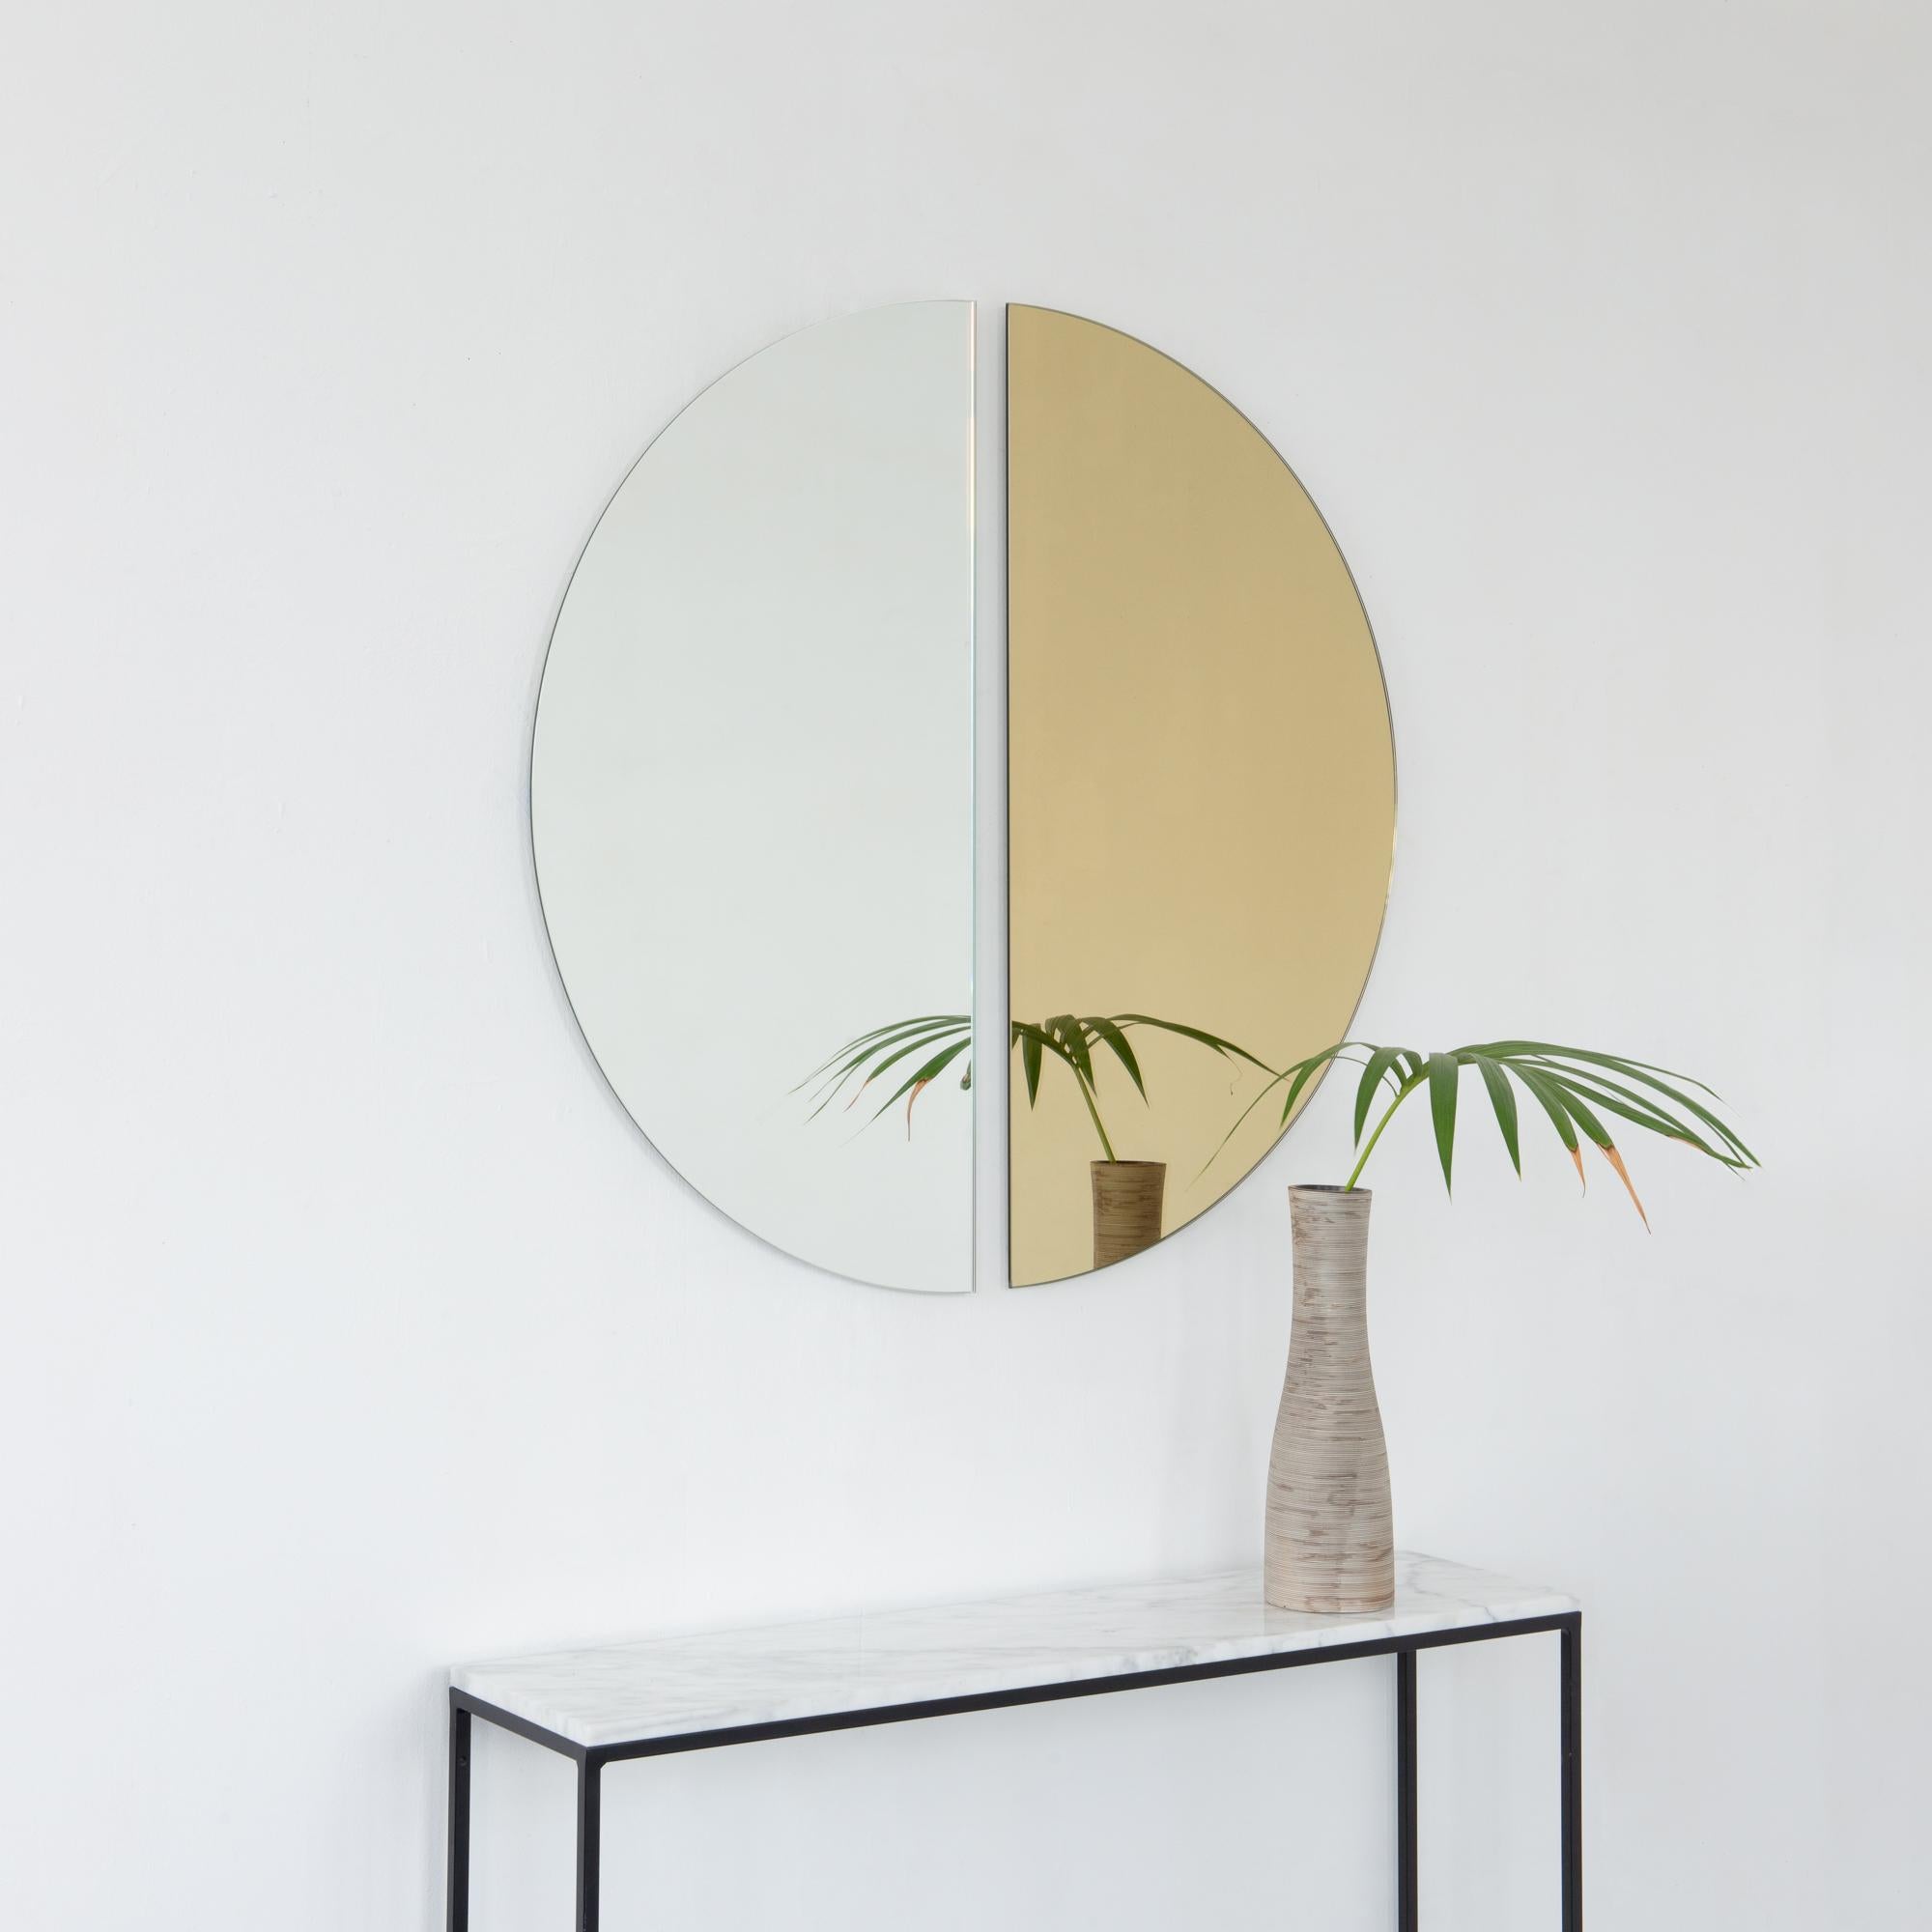 Set of two minimalist half-moon Luna™ standard silver + gold tinted frameless mirrors with a floating effect. Fitted with a quality and ingenious hanging system for a flexible installation in 4 different directions. Designed and made in London, UK.